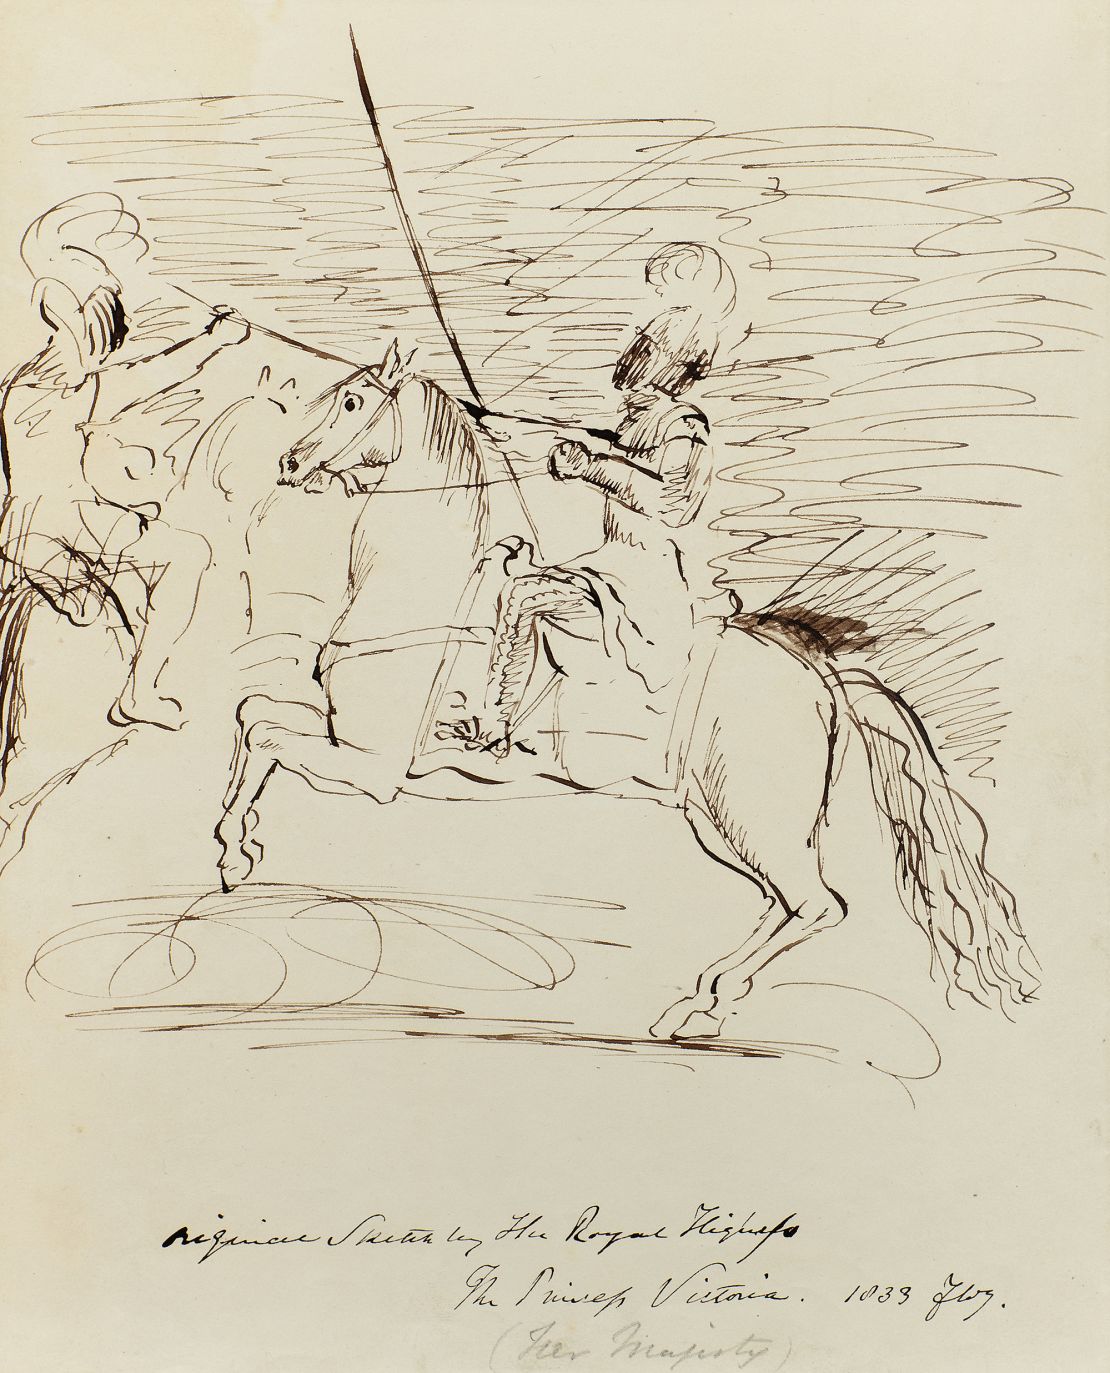 This ink sketch of a knight on horseback is inscribed "original sketch by the Royal Highness The Princess Victoria. (Her Majesty). 1833"